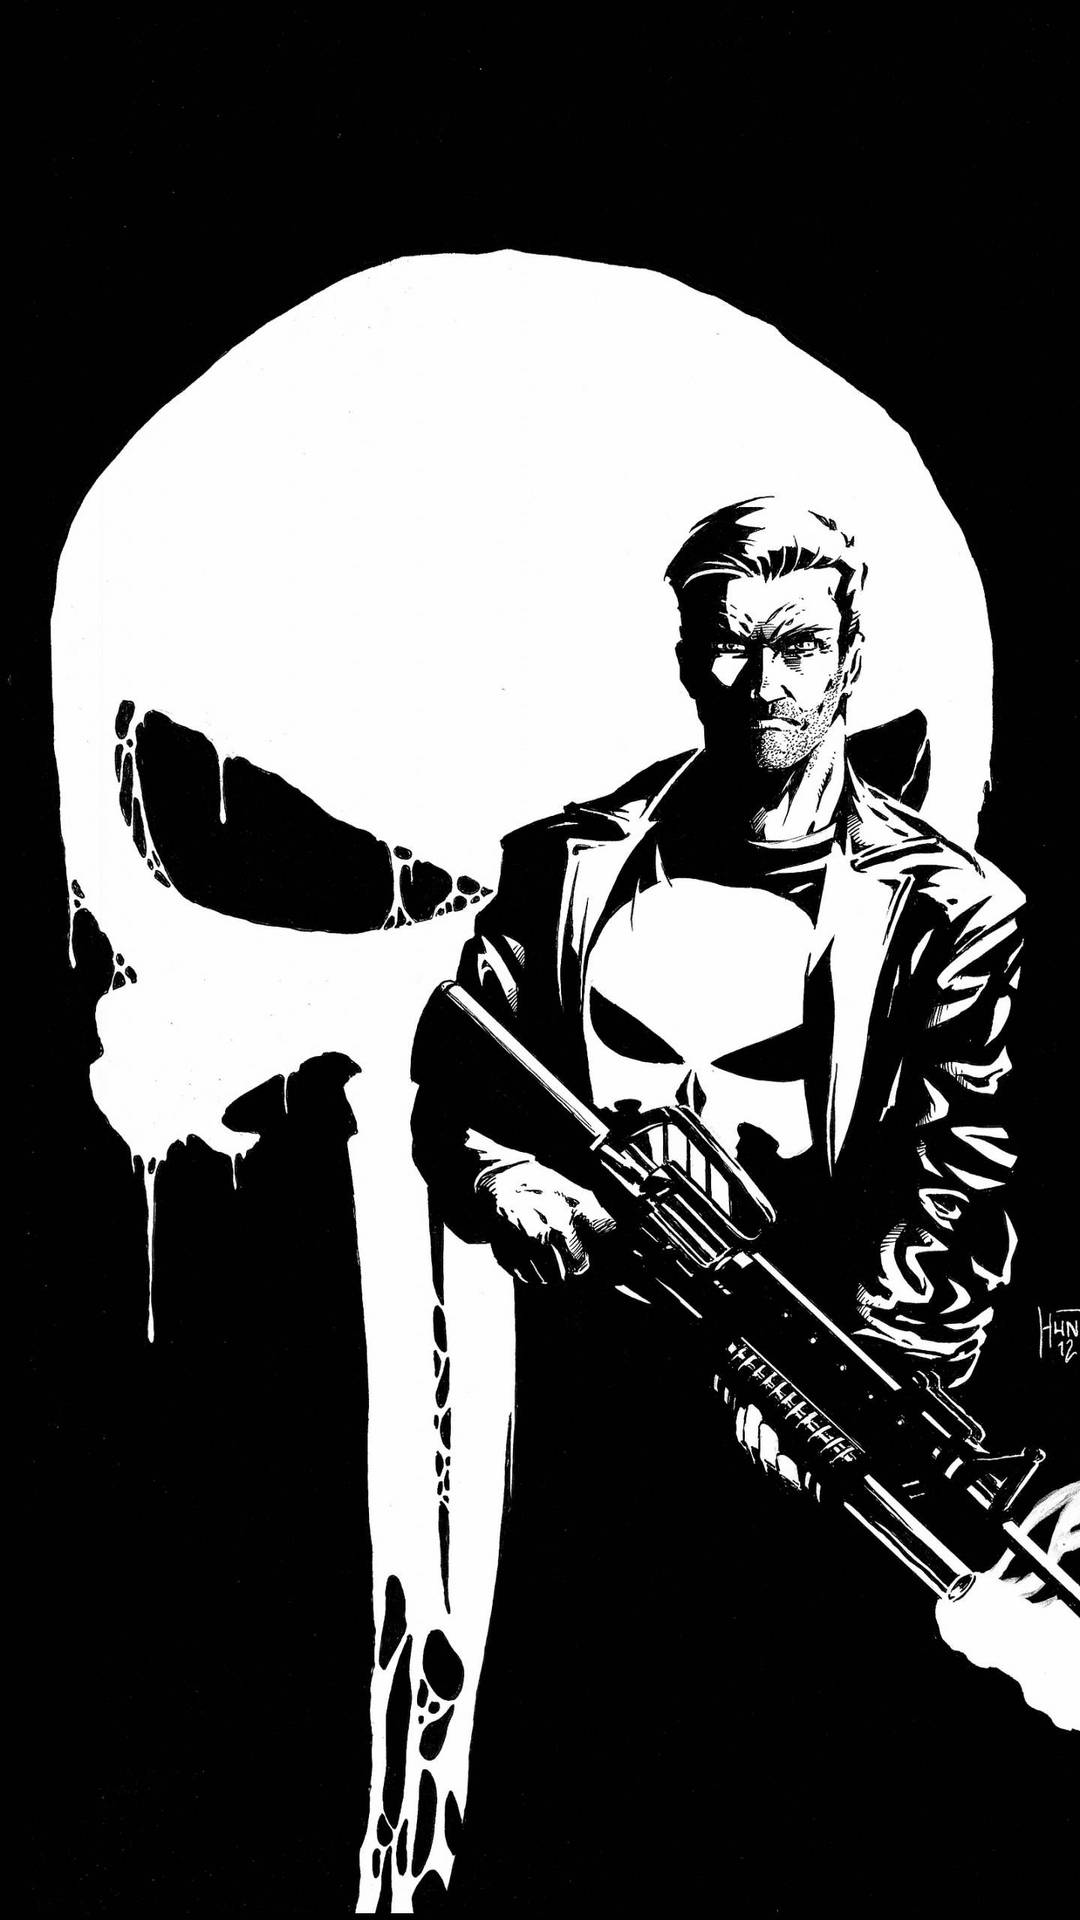 The Punisher comic book character - a symbol of justice Wallpaper